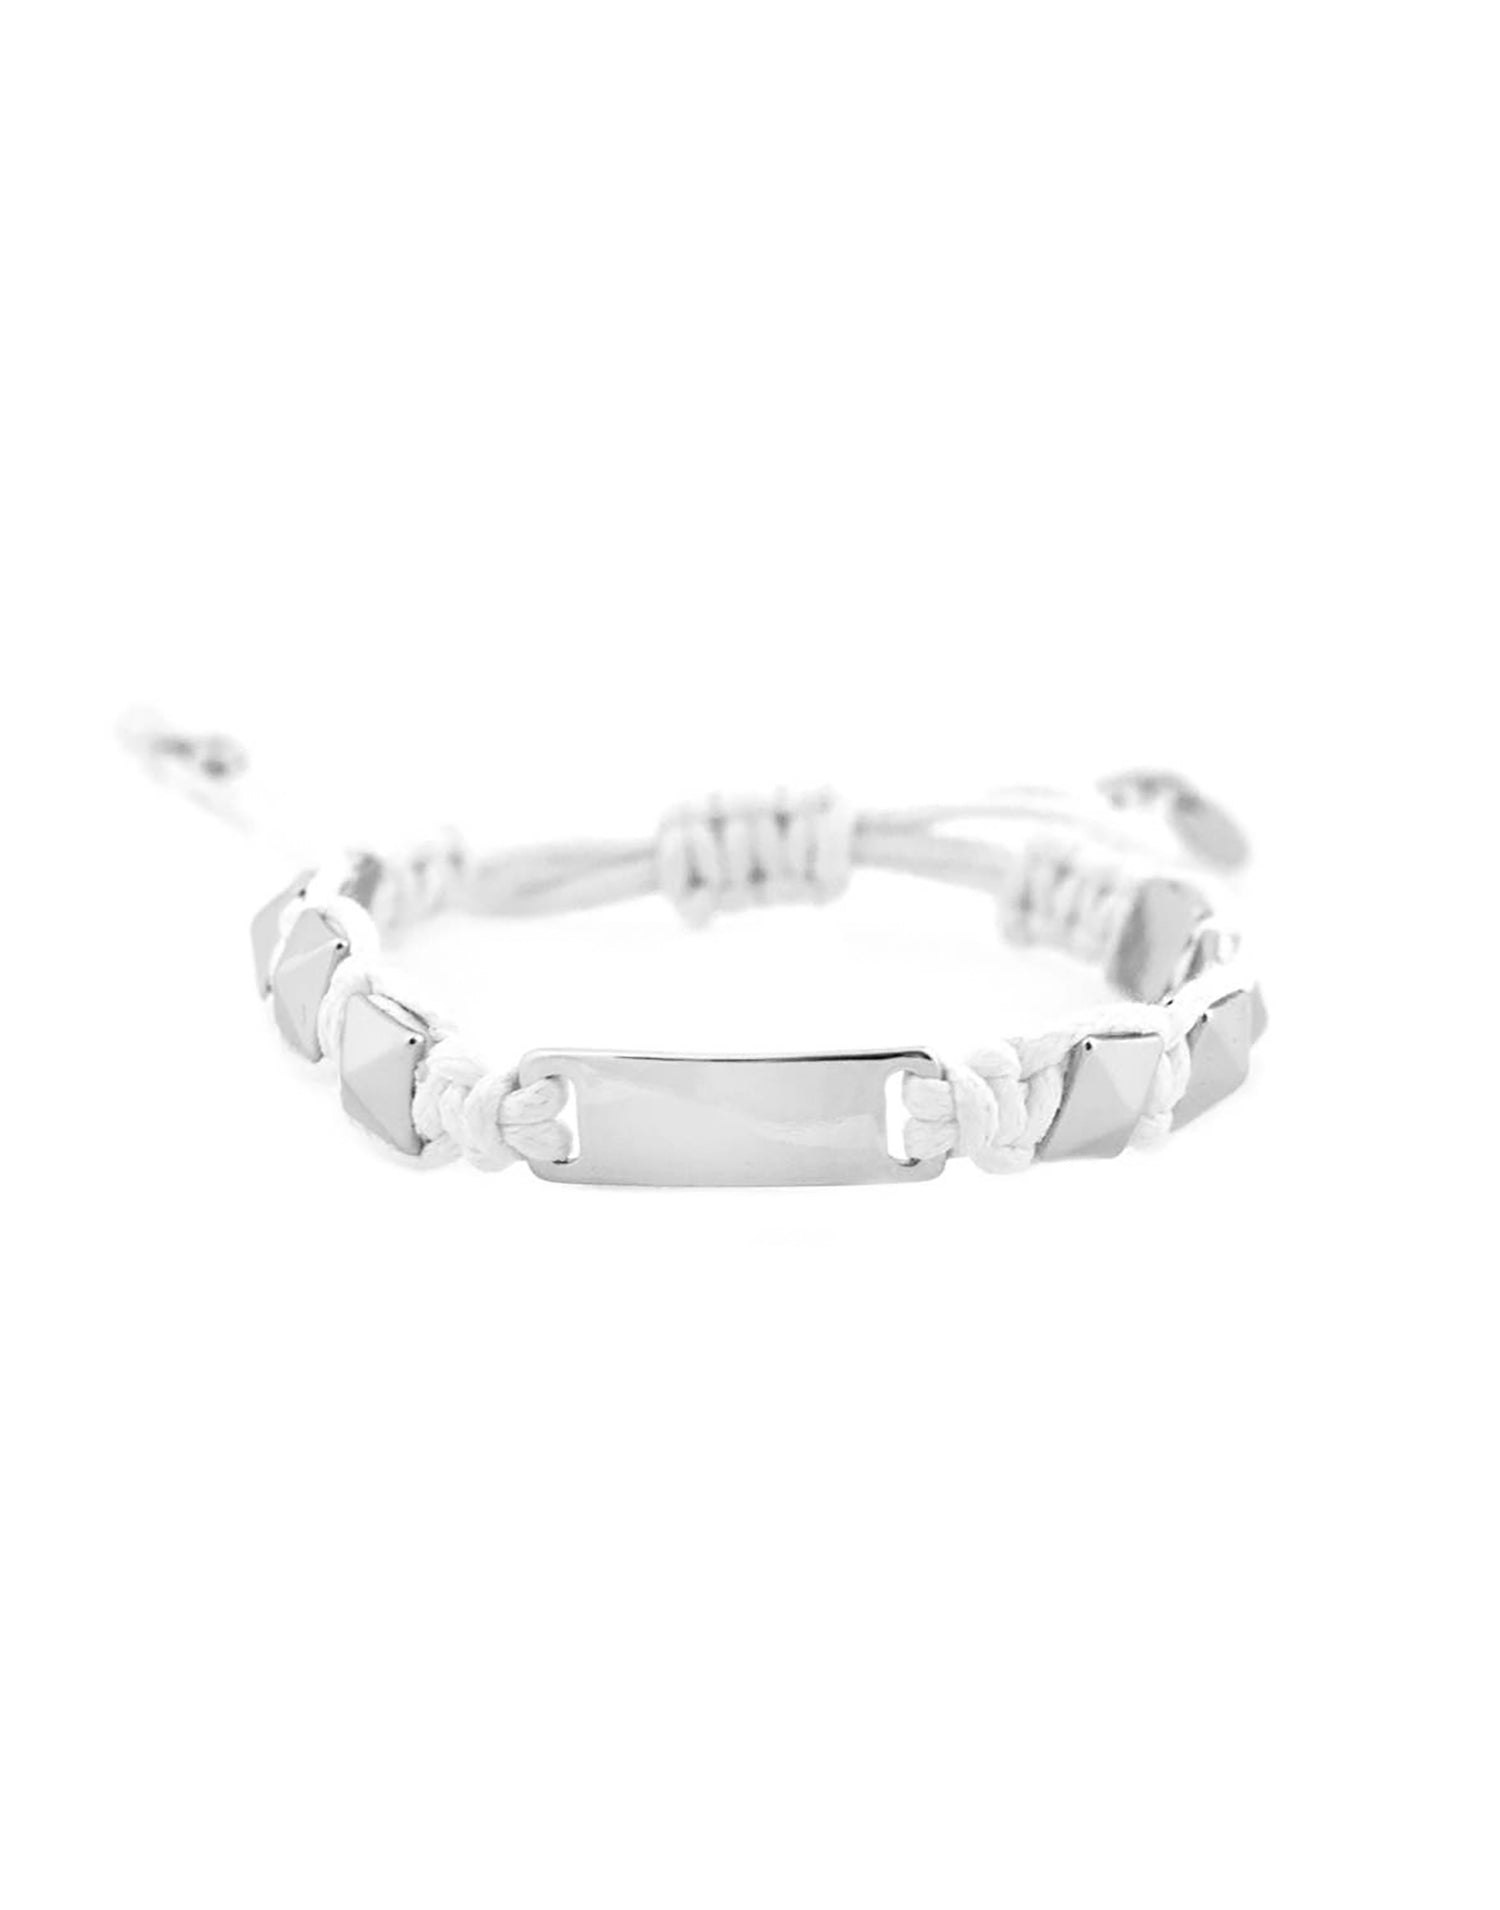 Pull Tie Bracelet by Marlyn Schiff in Silver/White - Product View